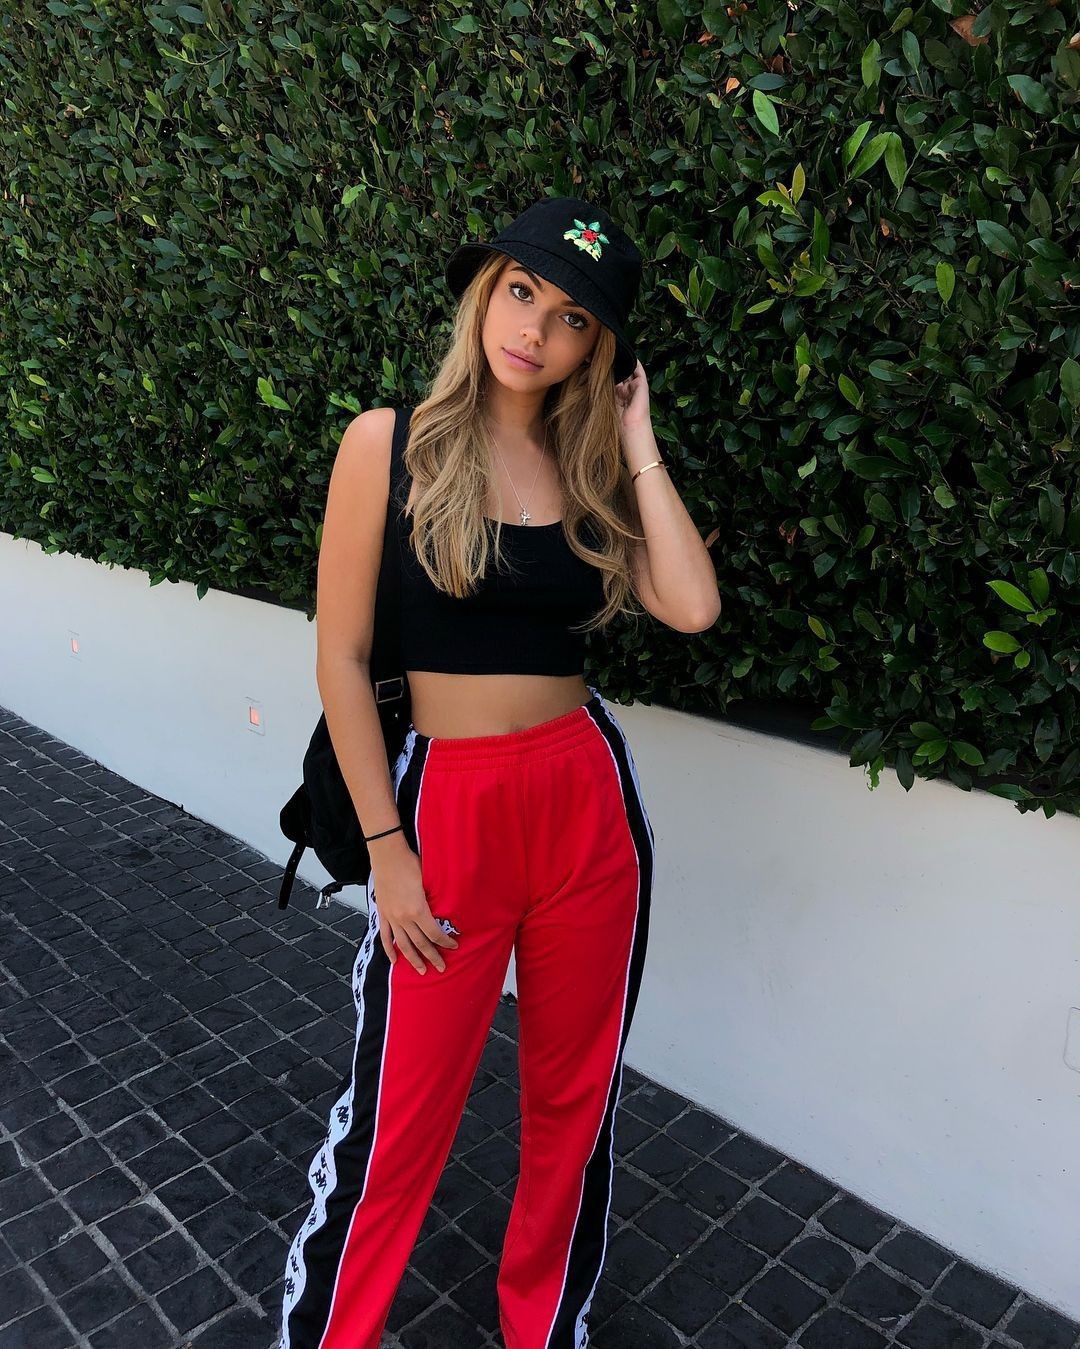 Outfits With Sweatpants, Kylie Jenner, Sports shoes: Kylie Jenner,  Sports shoes,  Casual Outfits,  Sweatpants Outfits,  Sports Pants,  Sports bra  